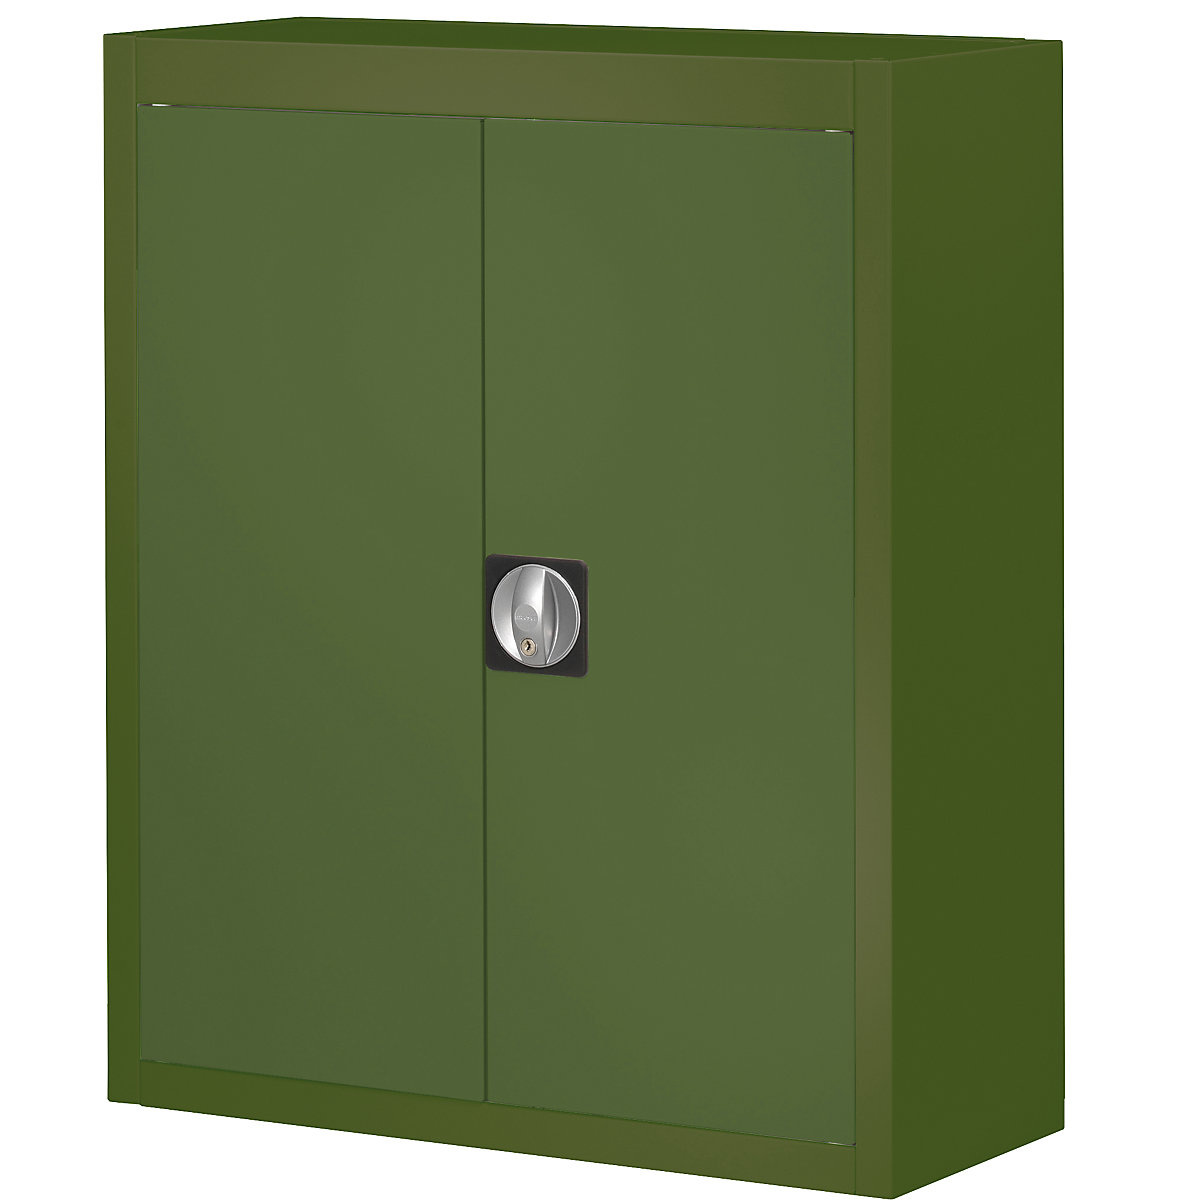 Storage cupboard, without open fronted storage bins – mauser, HxWxD 820 x 680 x 280 mm, single colour, green, 3+ items-5